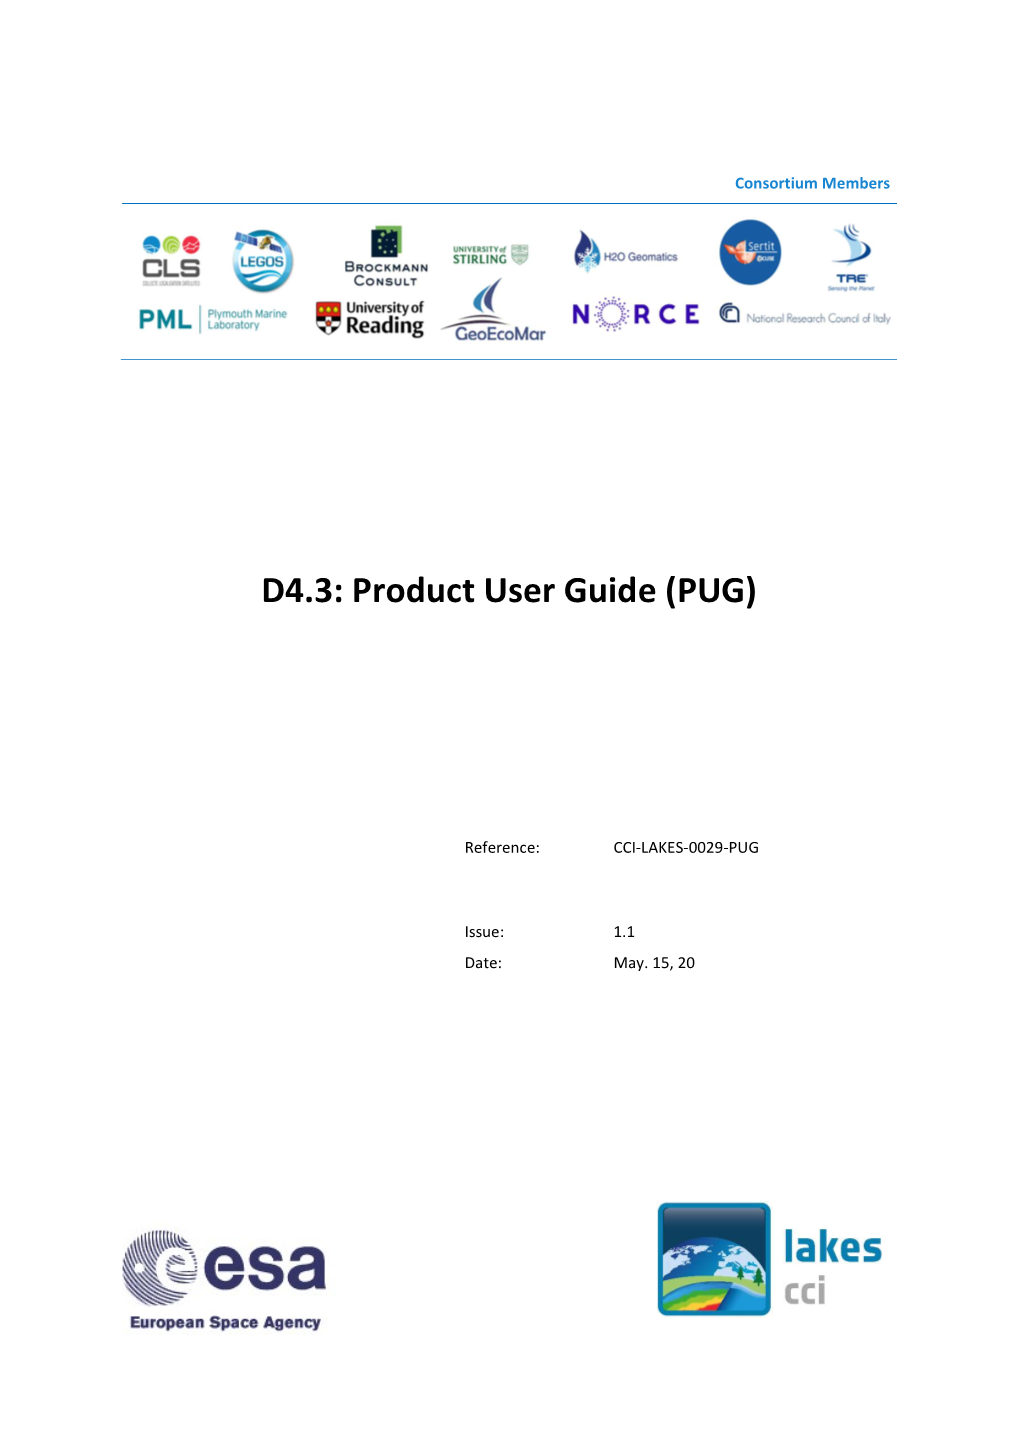 D4.3: Product User Guide (PUG)